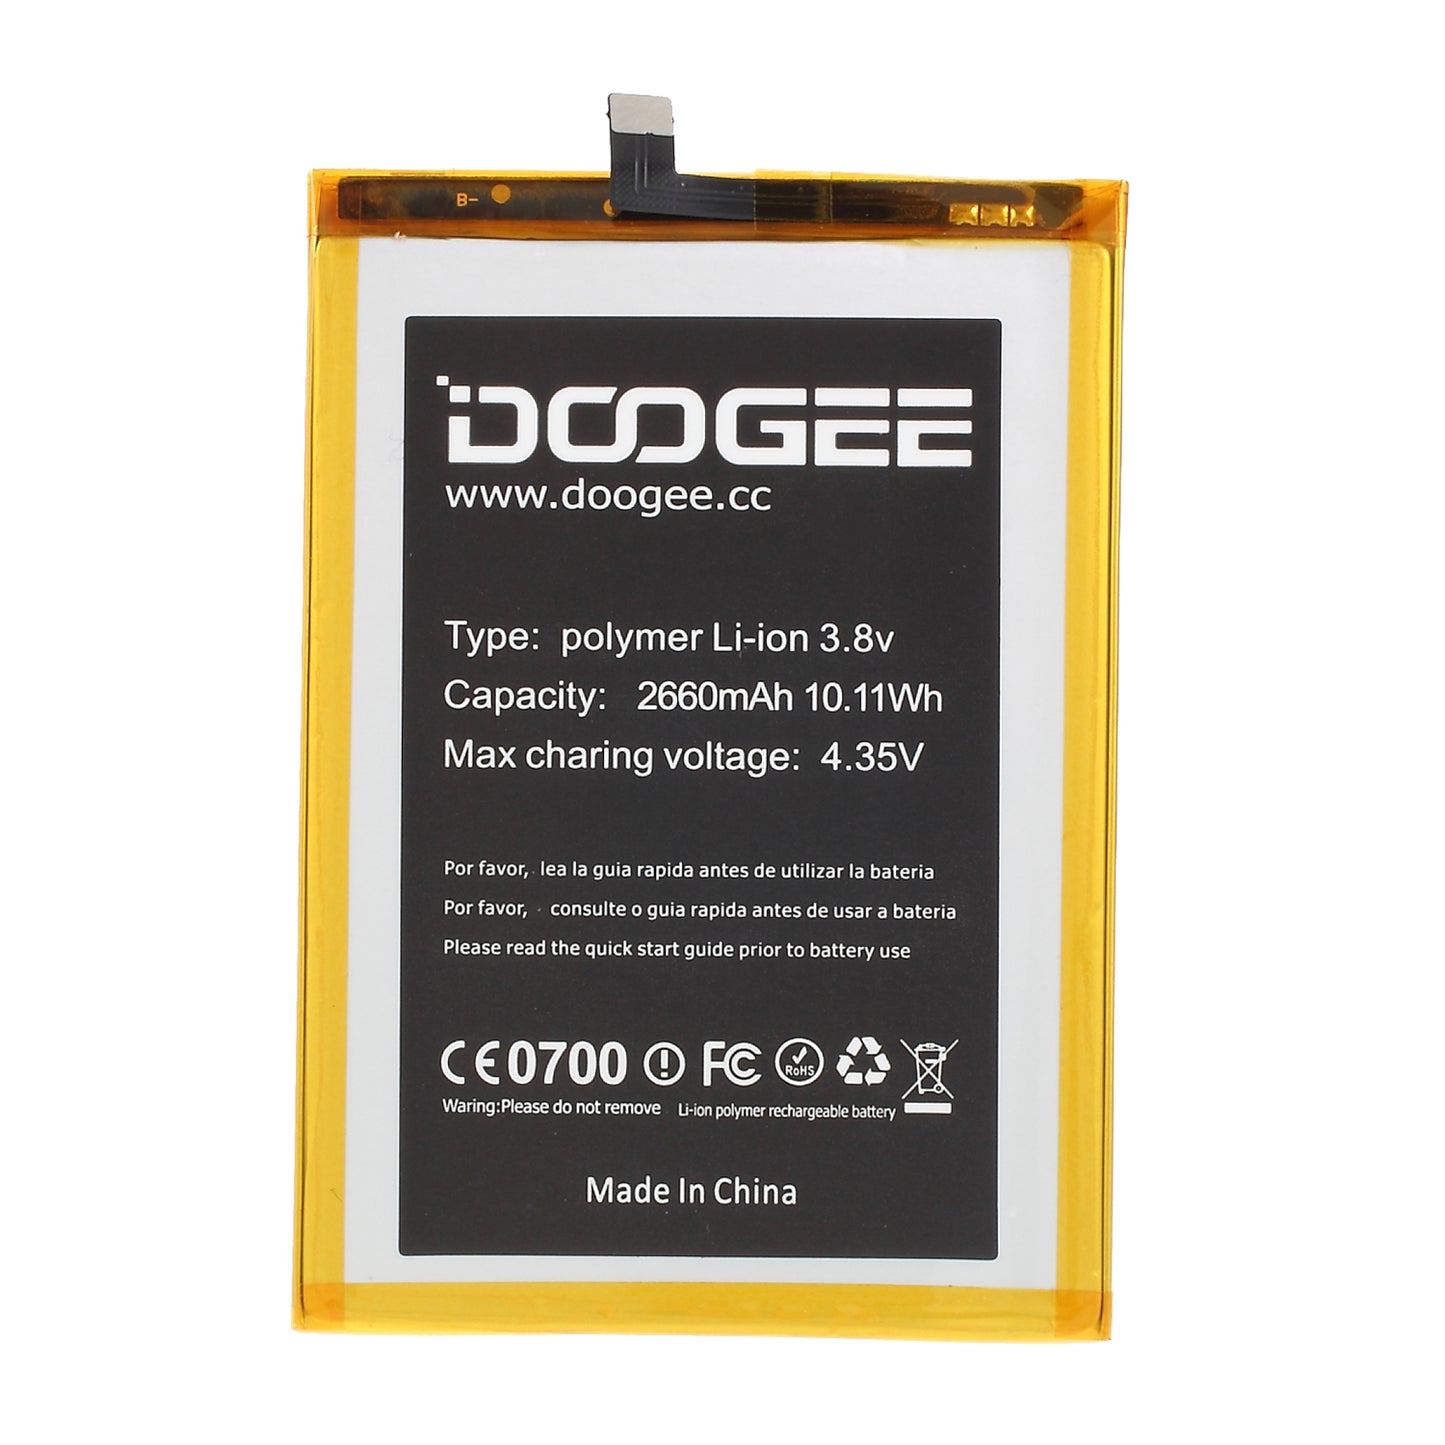 2660mAh Removable Li-ion Polymer Battery for Doogee F5